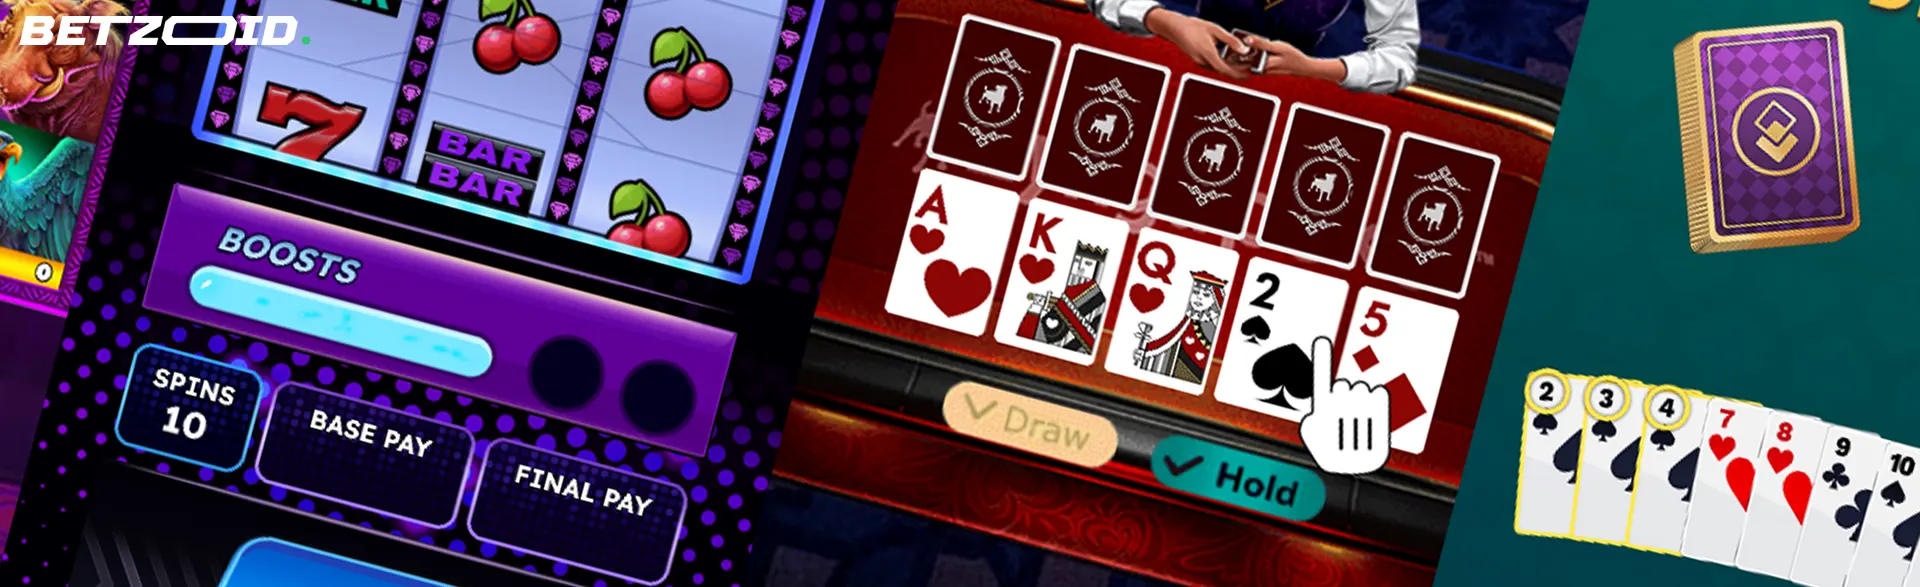 A collage of online casino games, including slot machines and card games, showcasing various options available at the best bonus casinos in Canada.